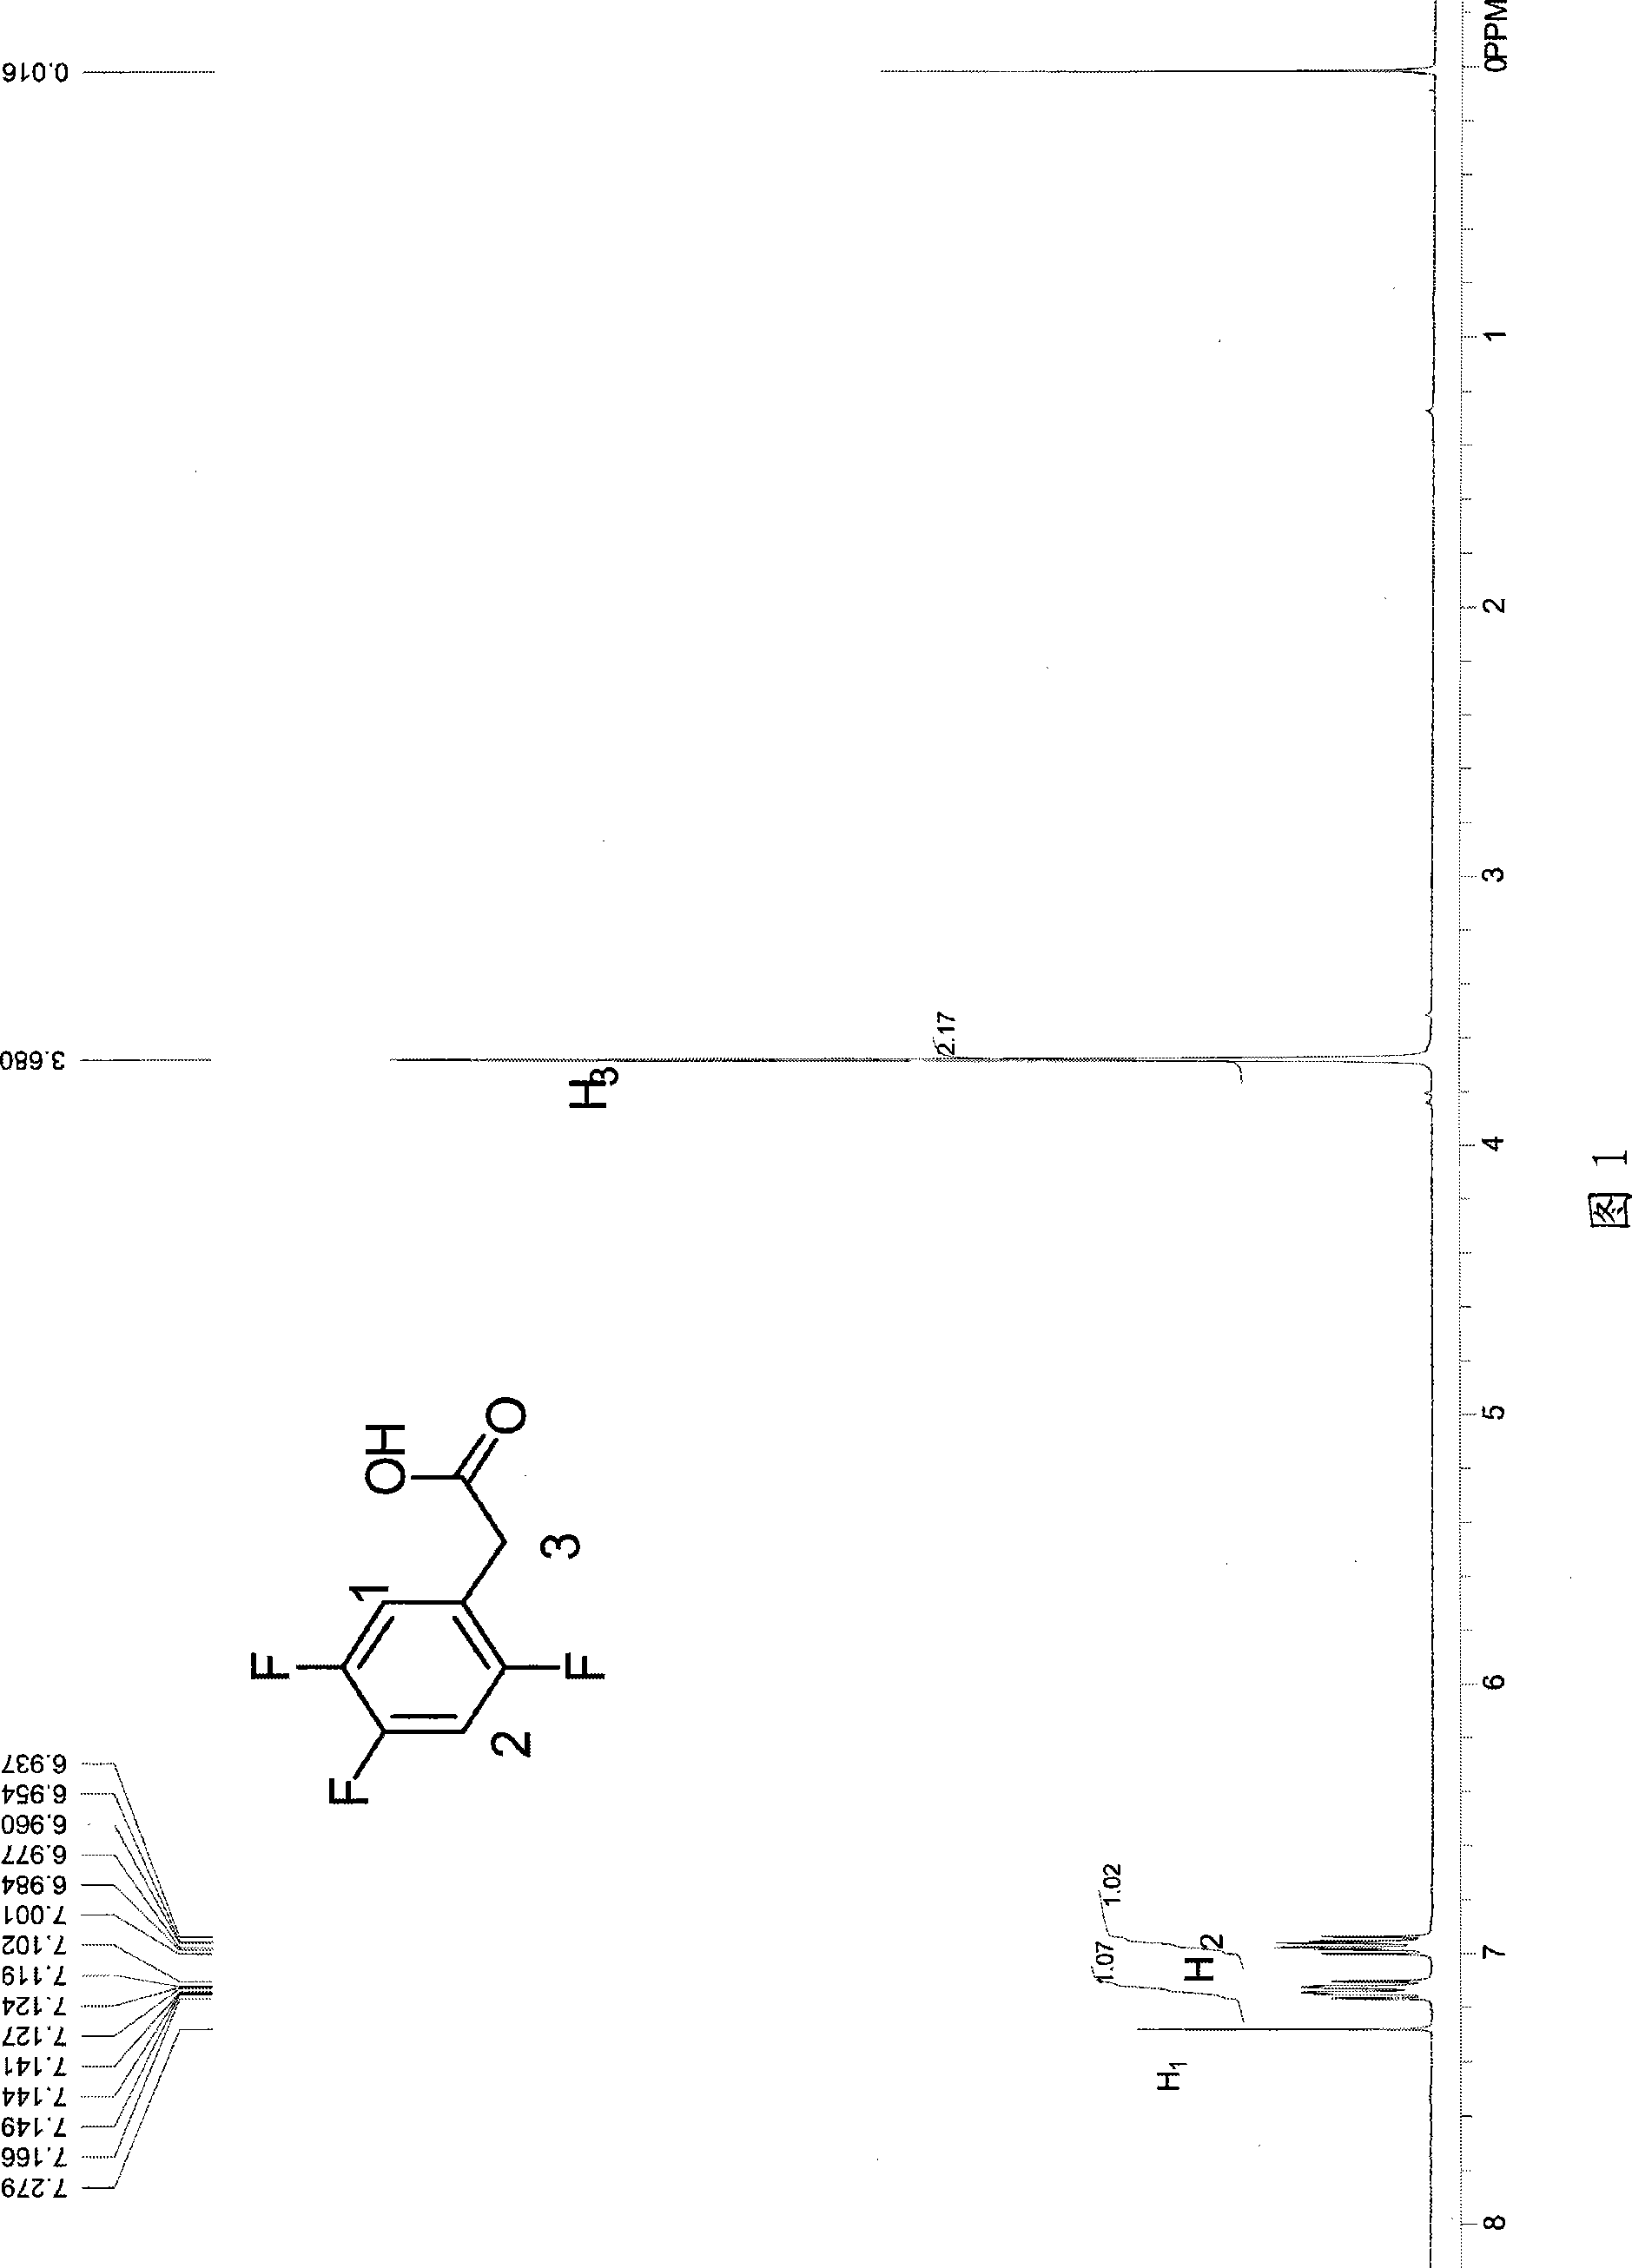 Process for producing trifluoro benzene acetic acid and sitagliptin